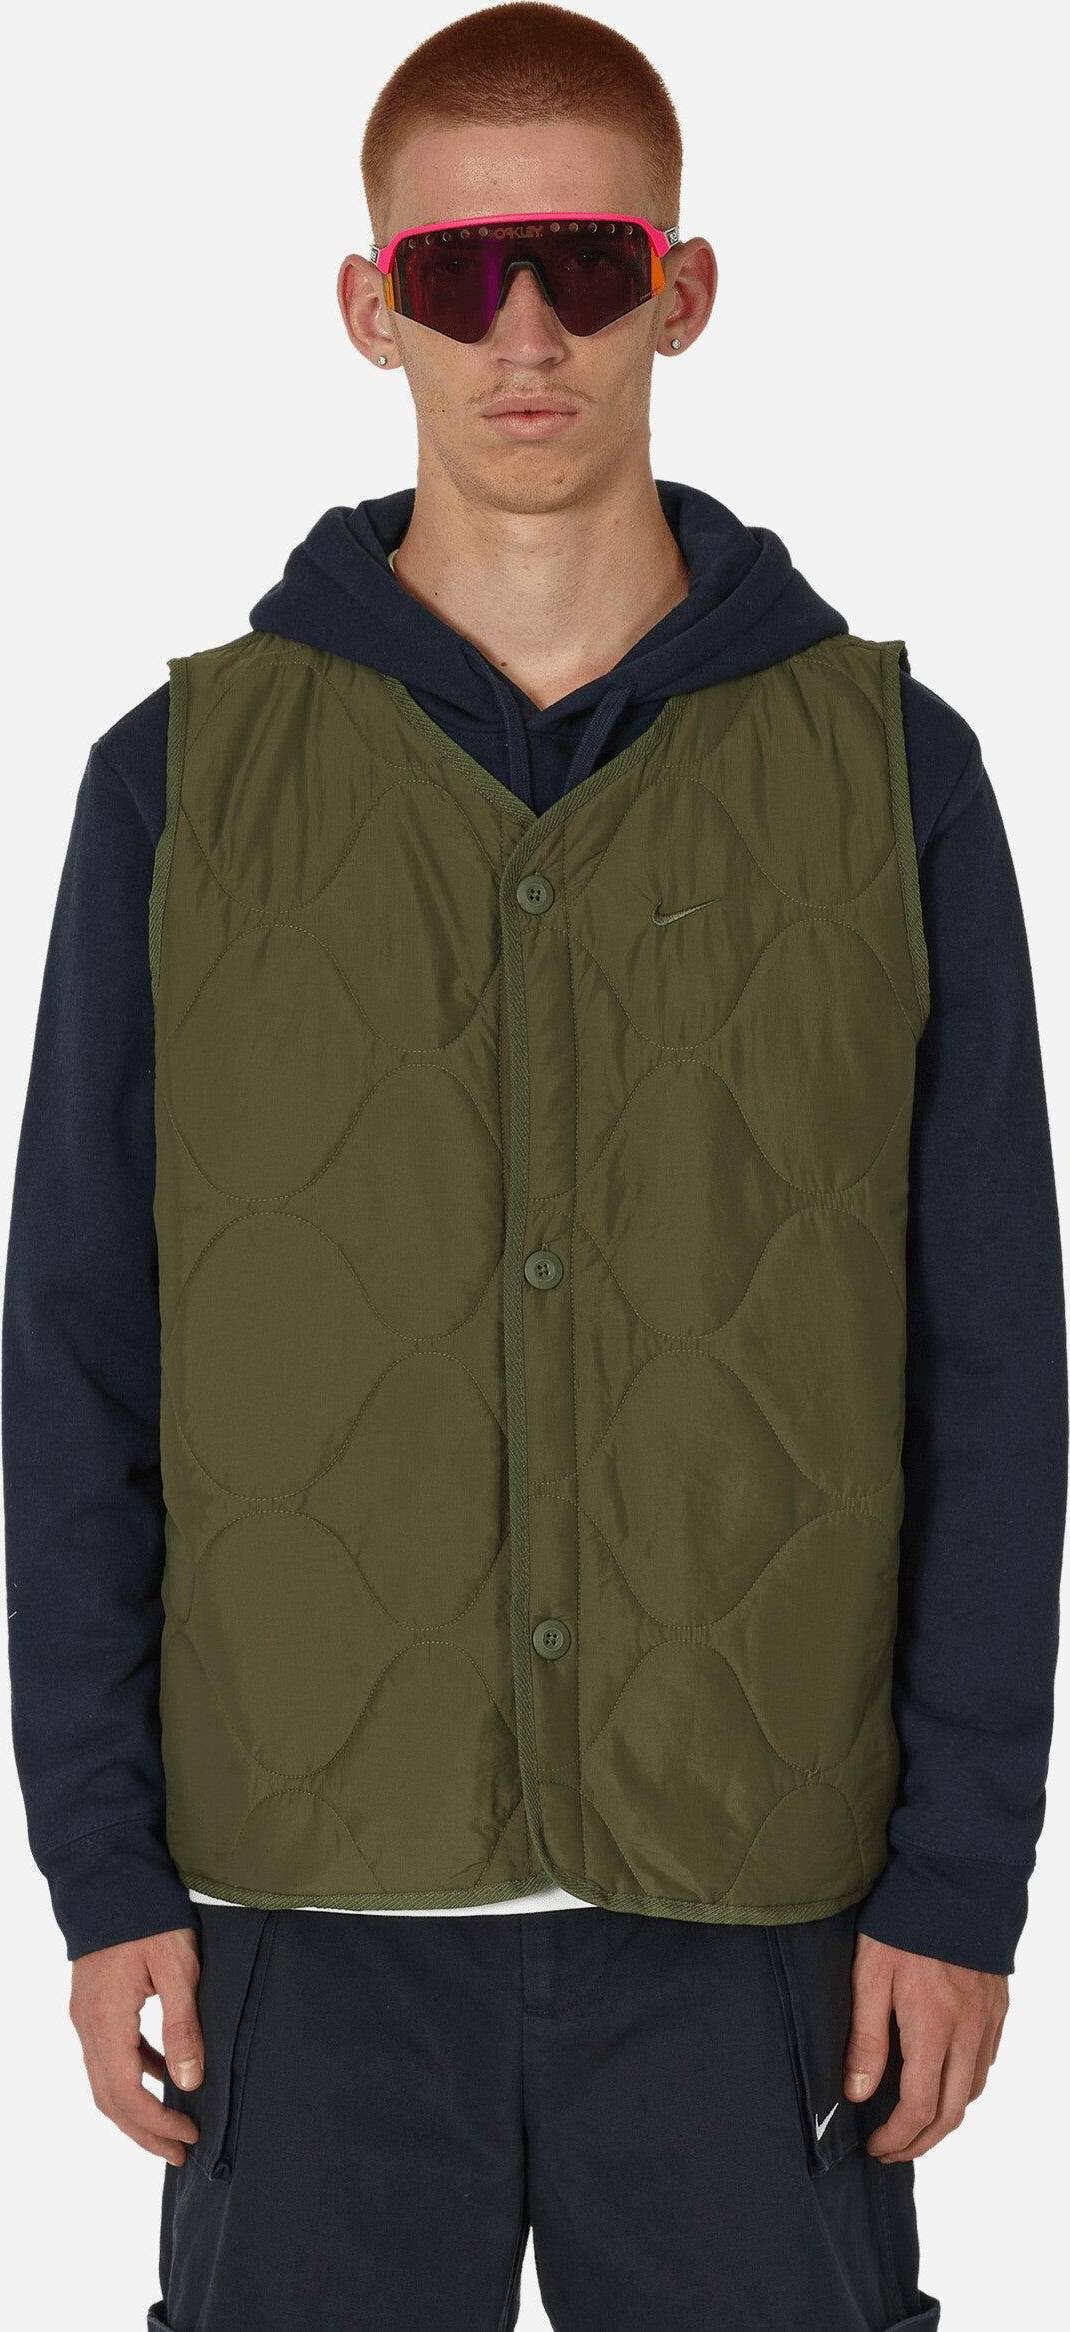 Mens nike gilet Nike Woven Insulated Military Vest, Green